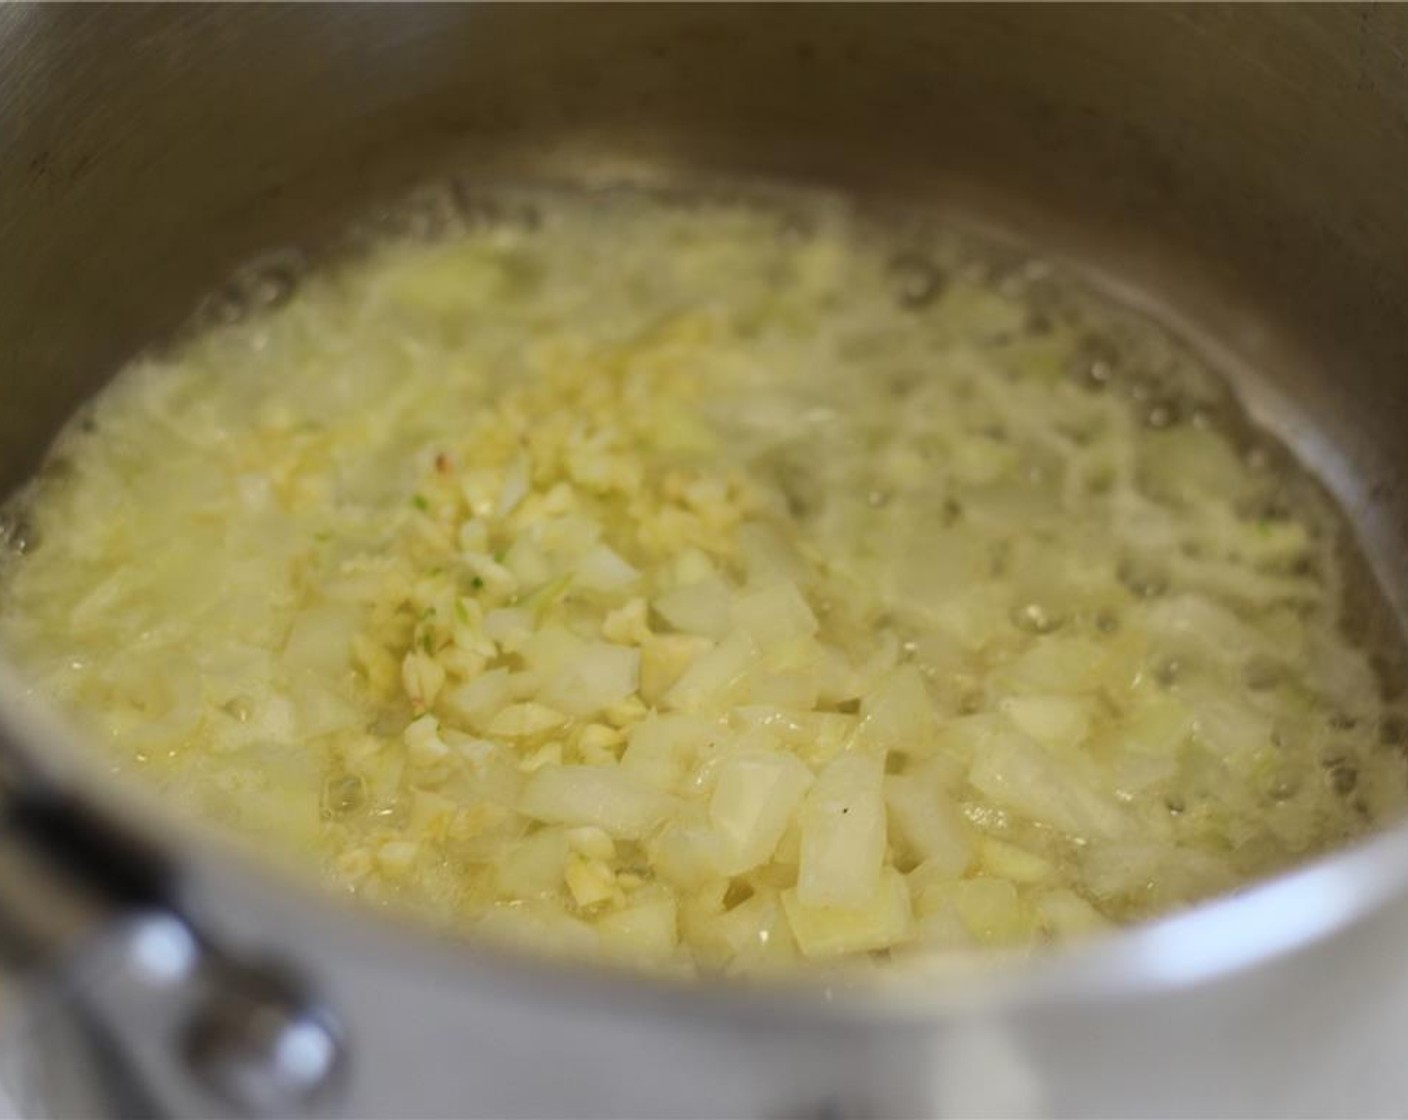 step 9 Melt the Butter (3 Tbsp) in a straight-sided pot over medium heat. Stir in the onions, garlic, and a pinch of salt. Cook for about 3 minutes, until the onions are soft and translucent.